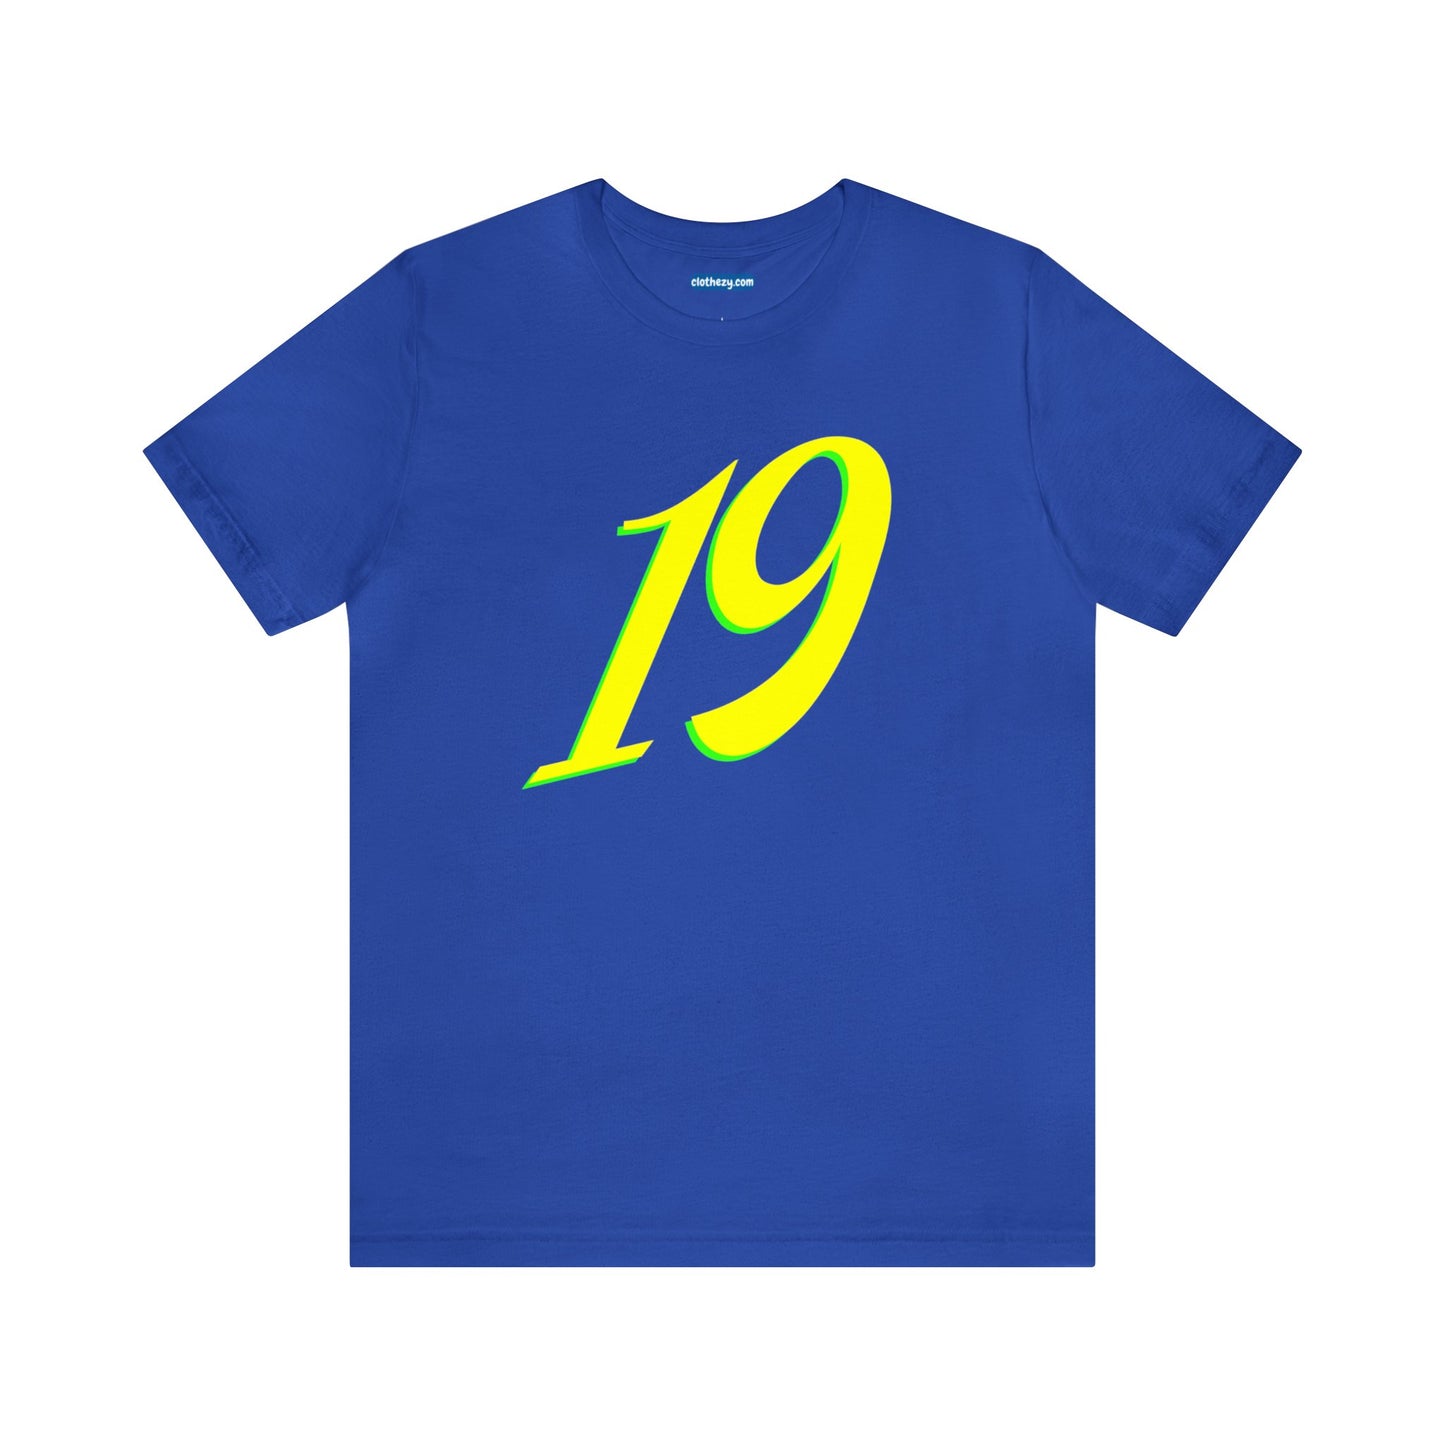 Number 19 Design - Soft Cotton Tee for birthdays and celebrations, Gift for friends and family, Multiple Options by clothezy.com in Royal Blue Size Small - Buy Now